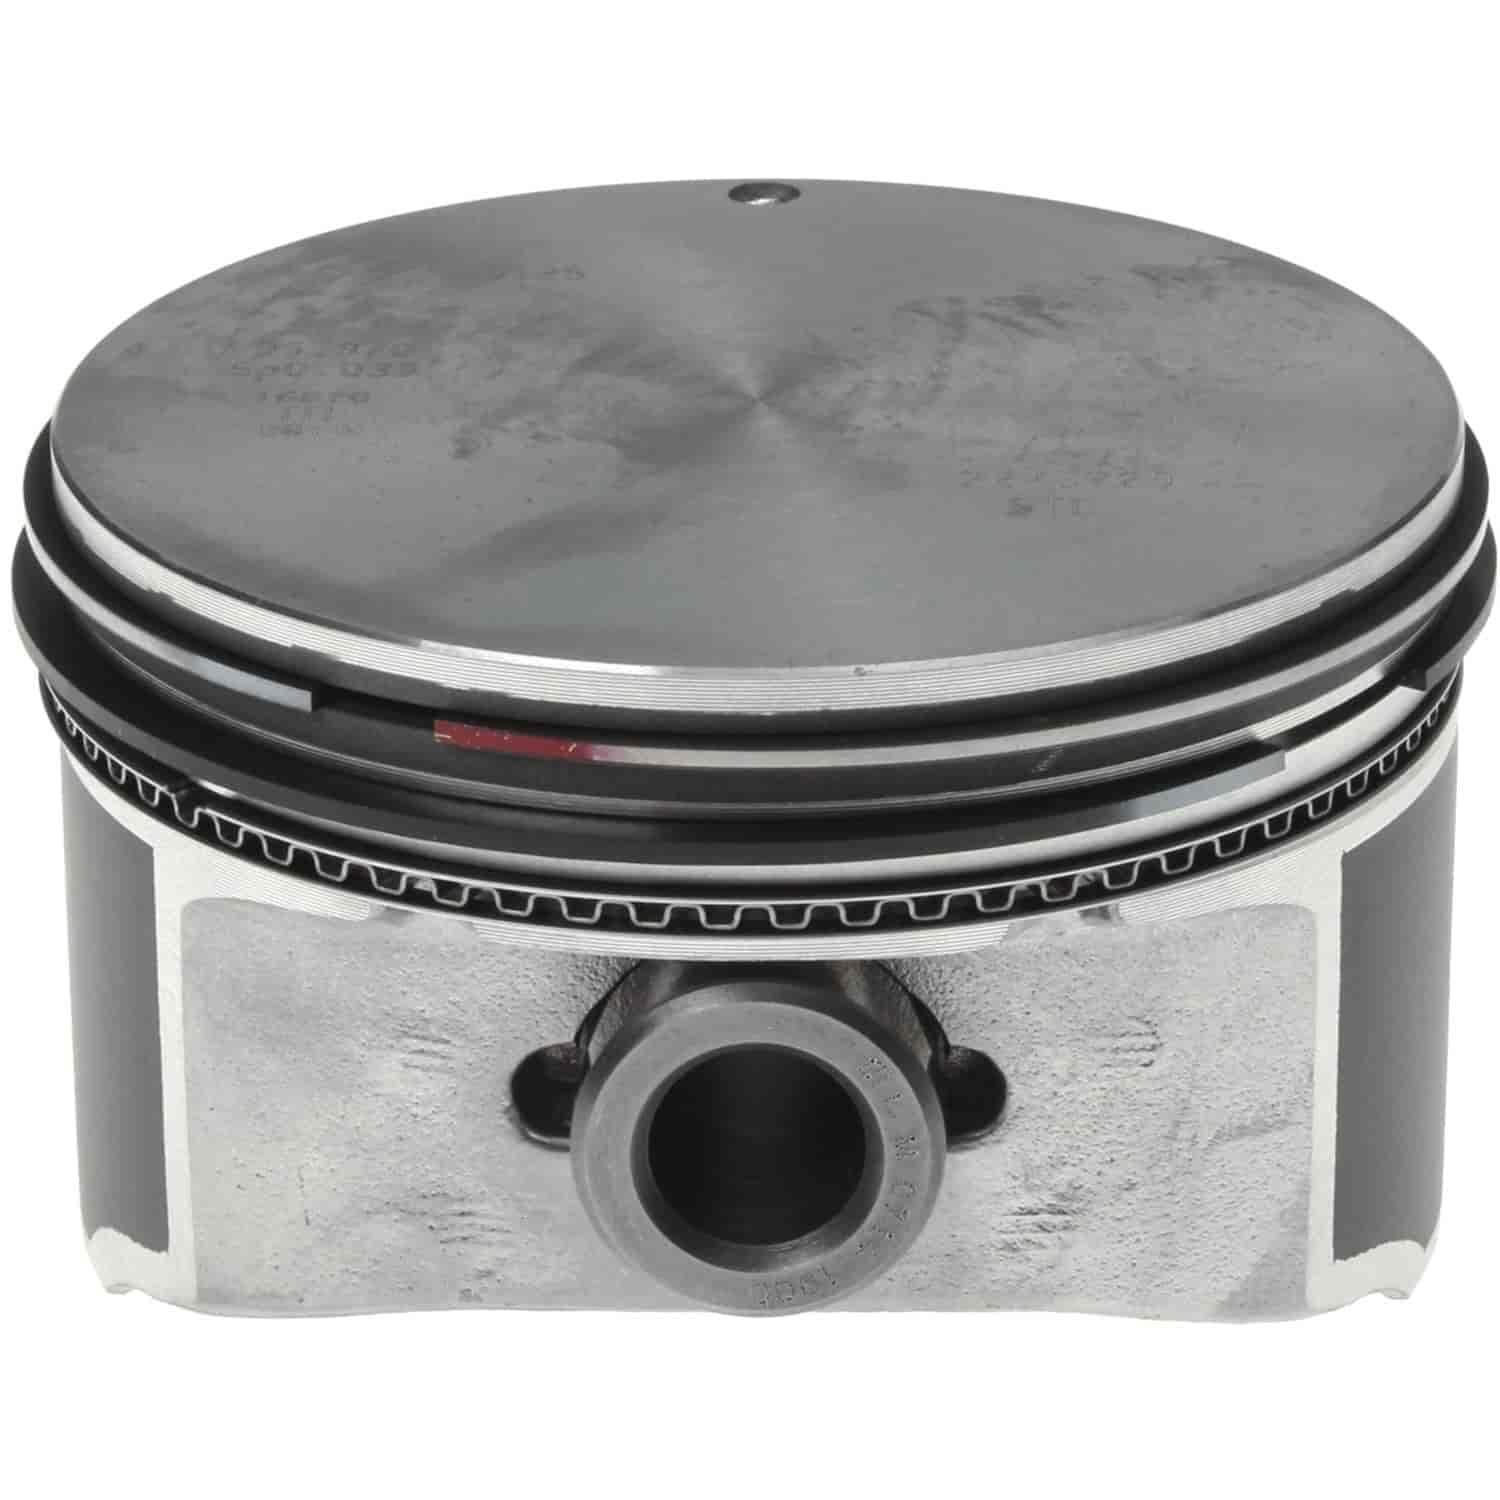 Piston and Rings Set 2005-2009 Chevy LS V8 4.8/5.3L with 3.82"/97.0mm Bore (+1.00mm)